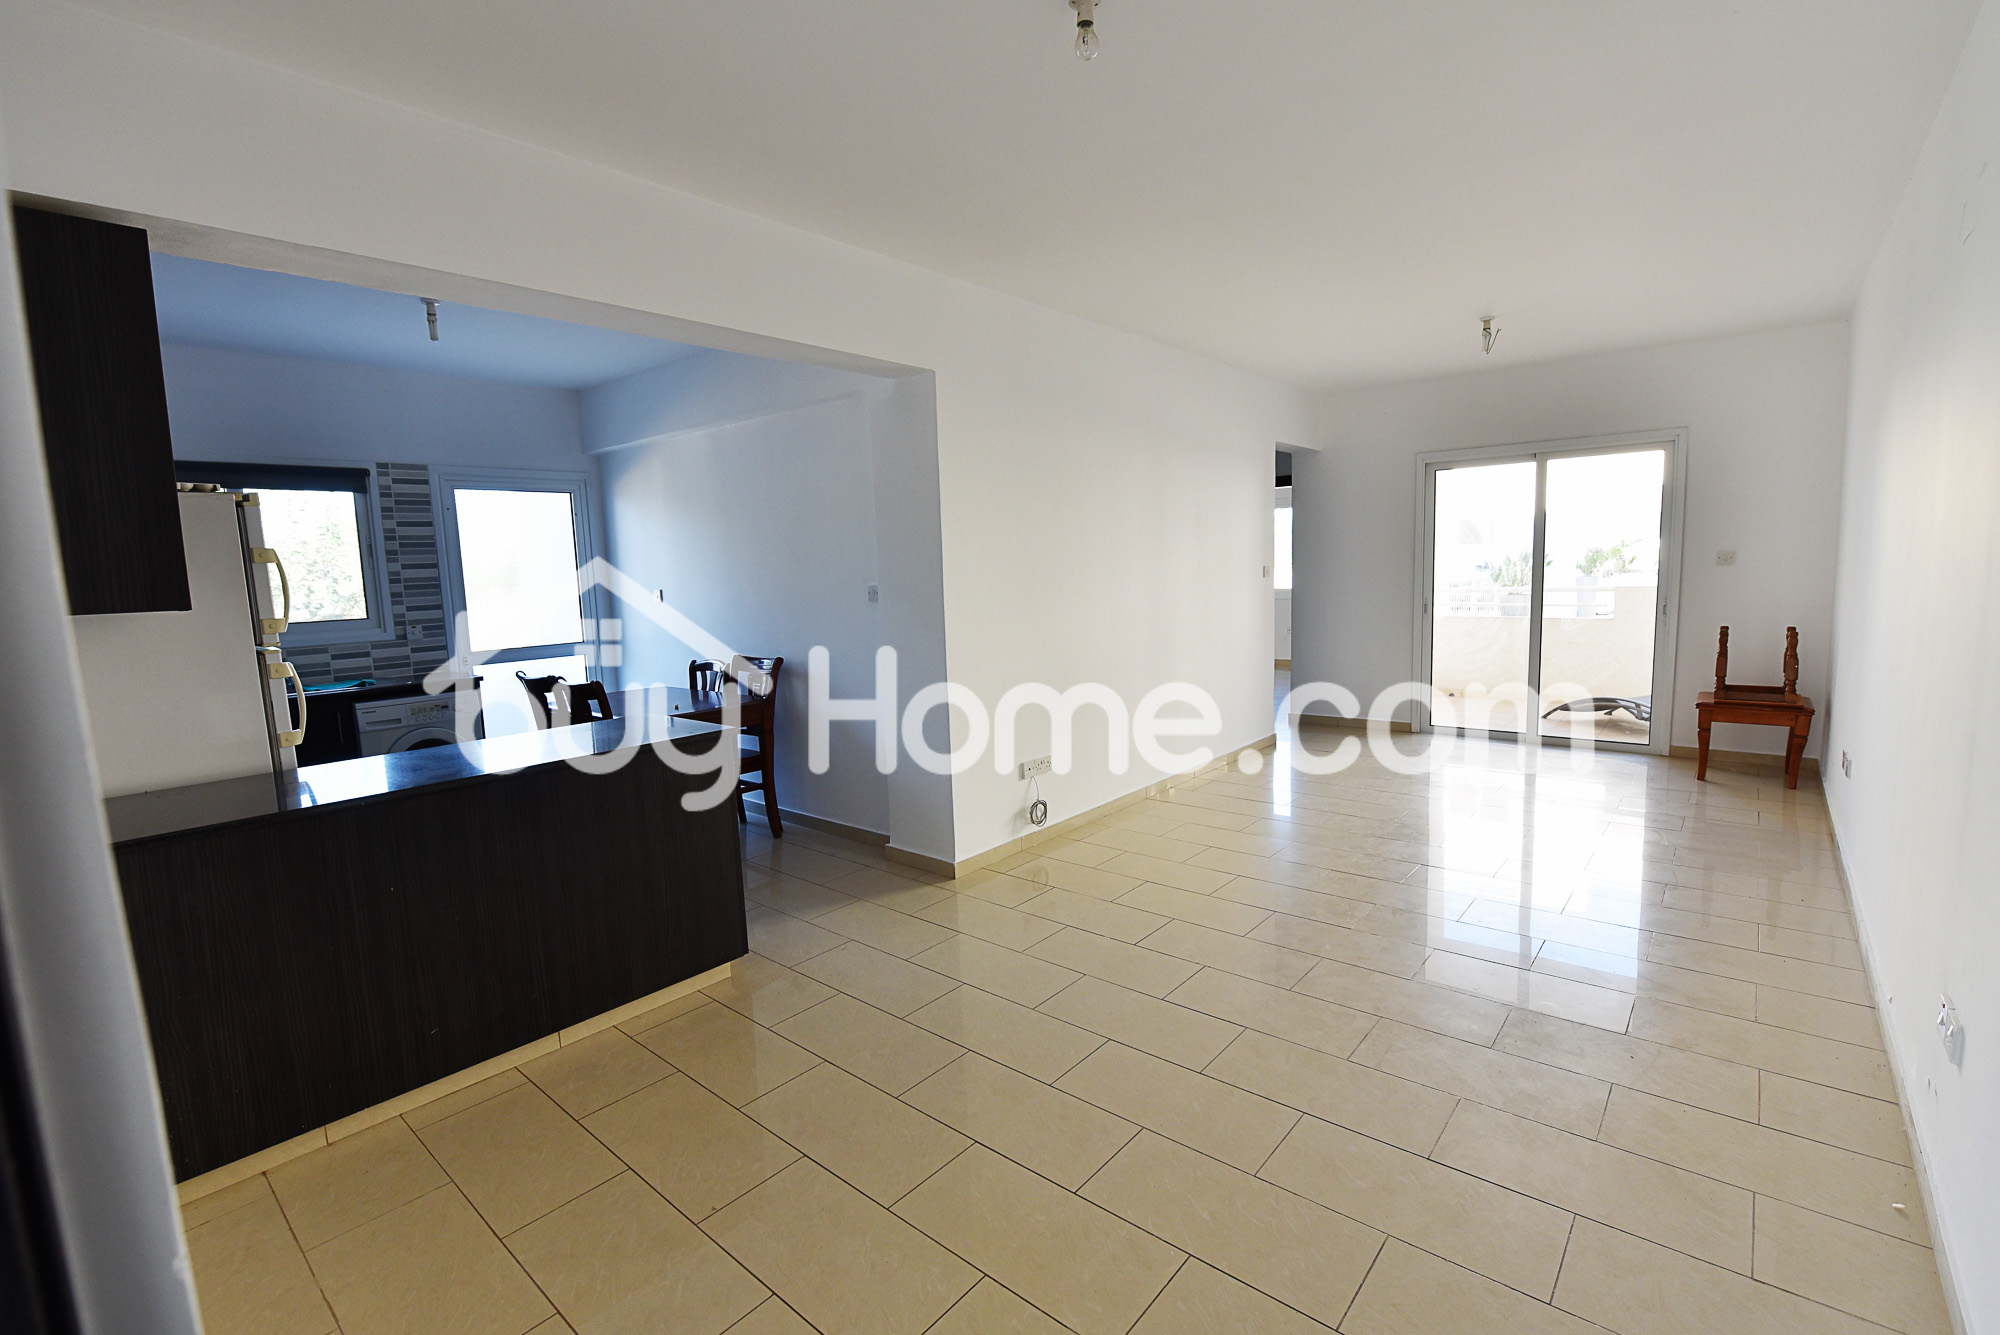 2 Bedroom Ground Floor Apartment with Pool | BuyHome